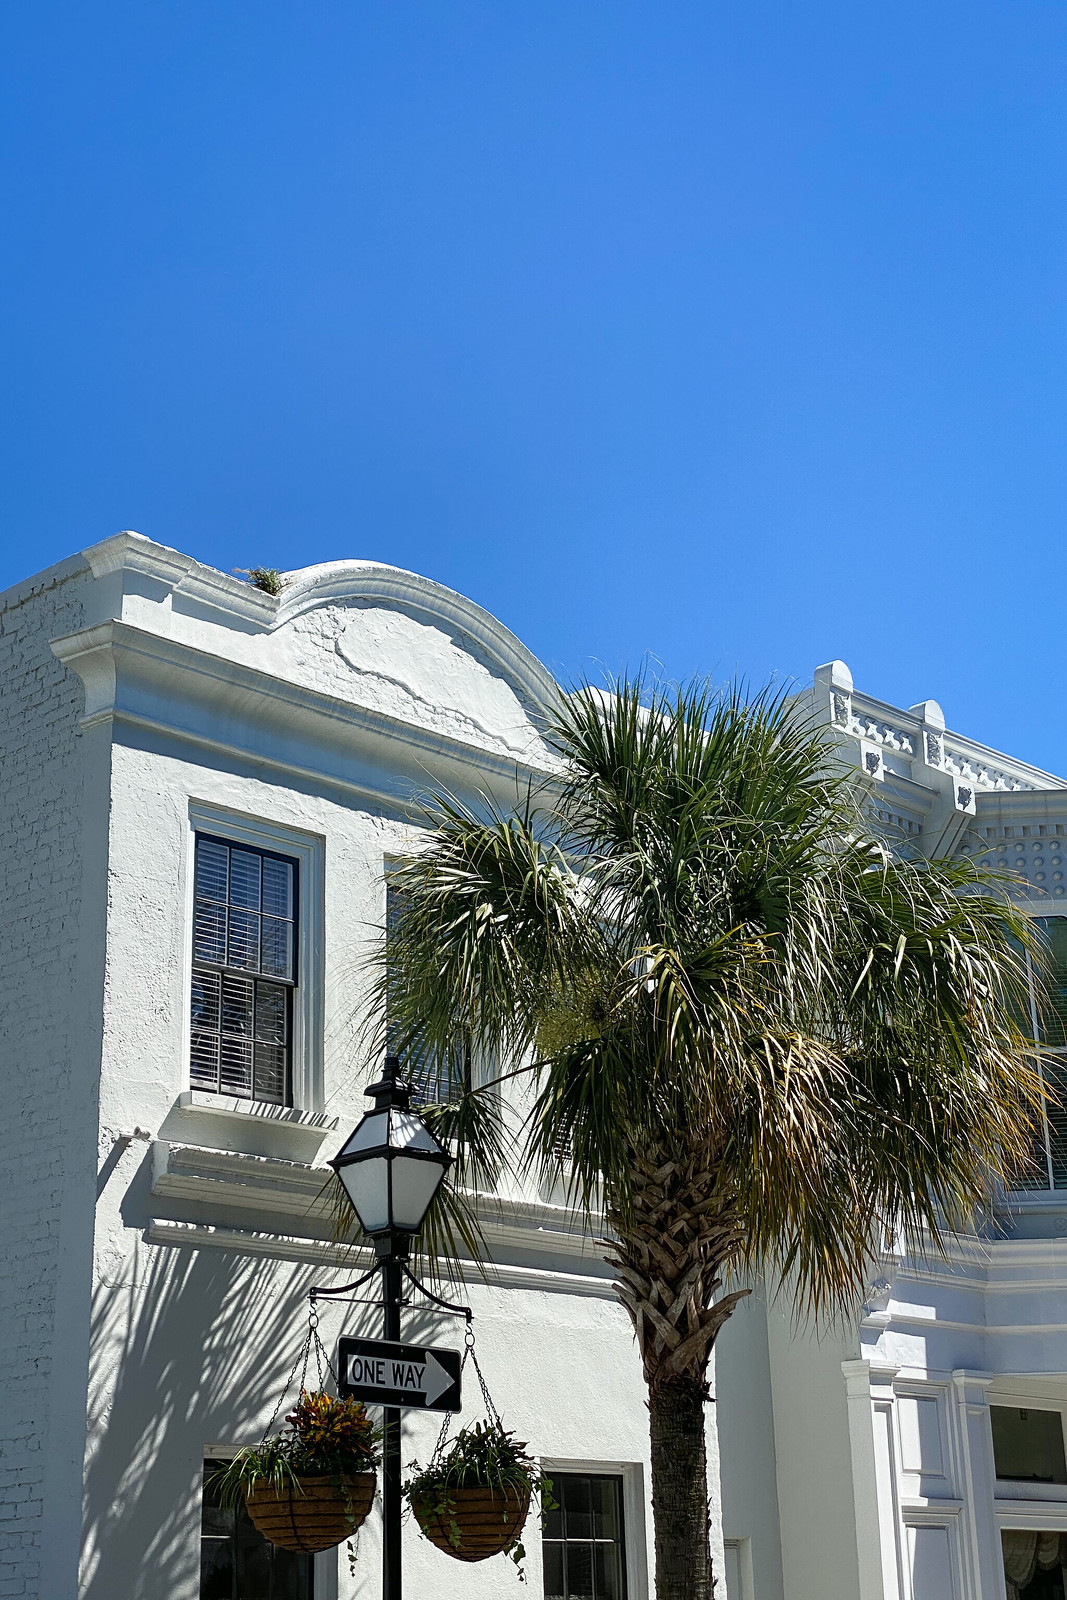 10 Things You Must Do in Charleston | Shopping on King Street | What to Do in Charleston South Carolina | Charleston Travel Guide | Top Things to do in Charleston | Best Things to Do in Charleston SC | What to See, Do & Eat in Charleston